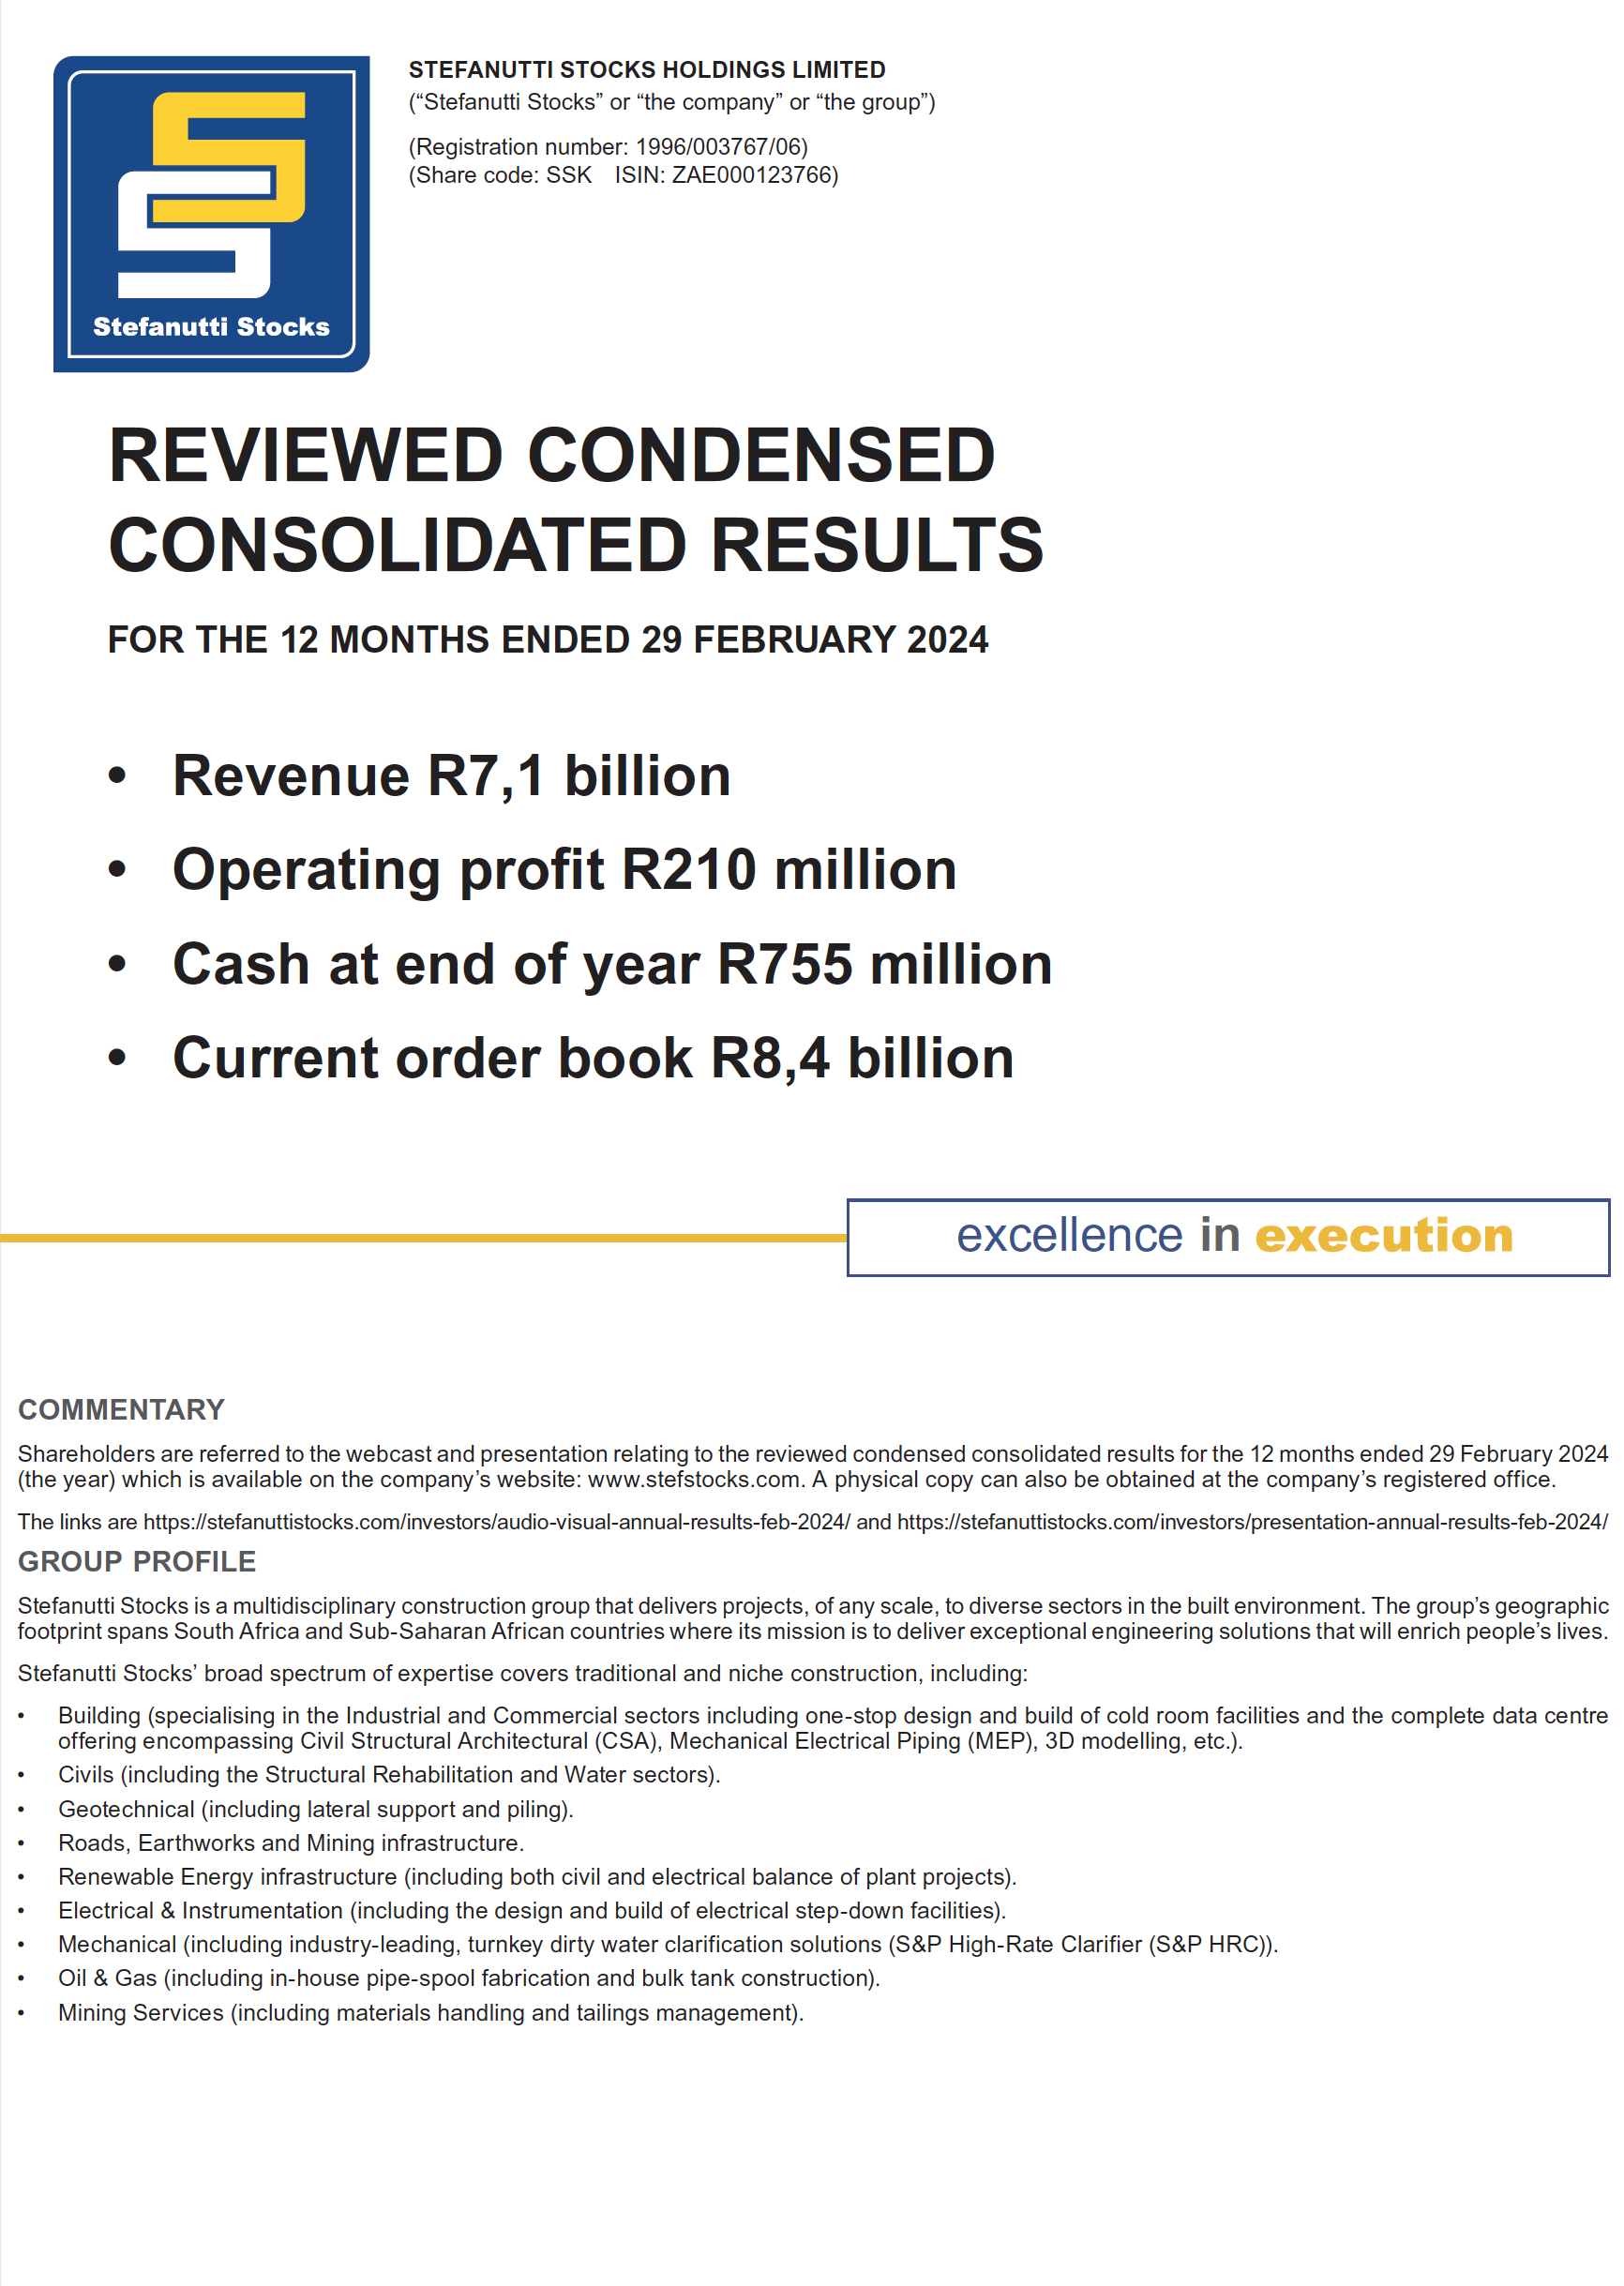 Reviewed Condensed Consolidated Results – Feb 2024